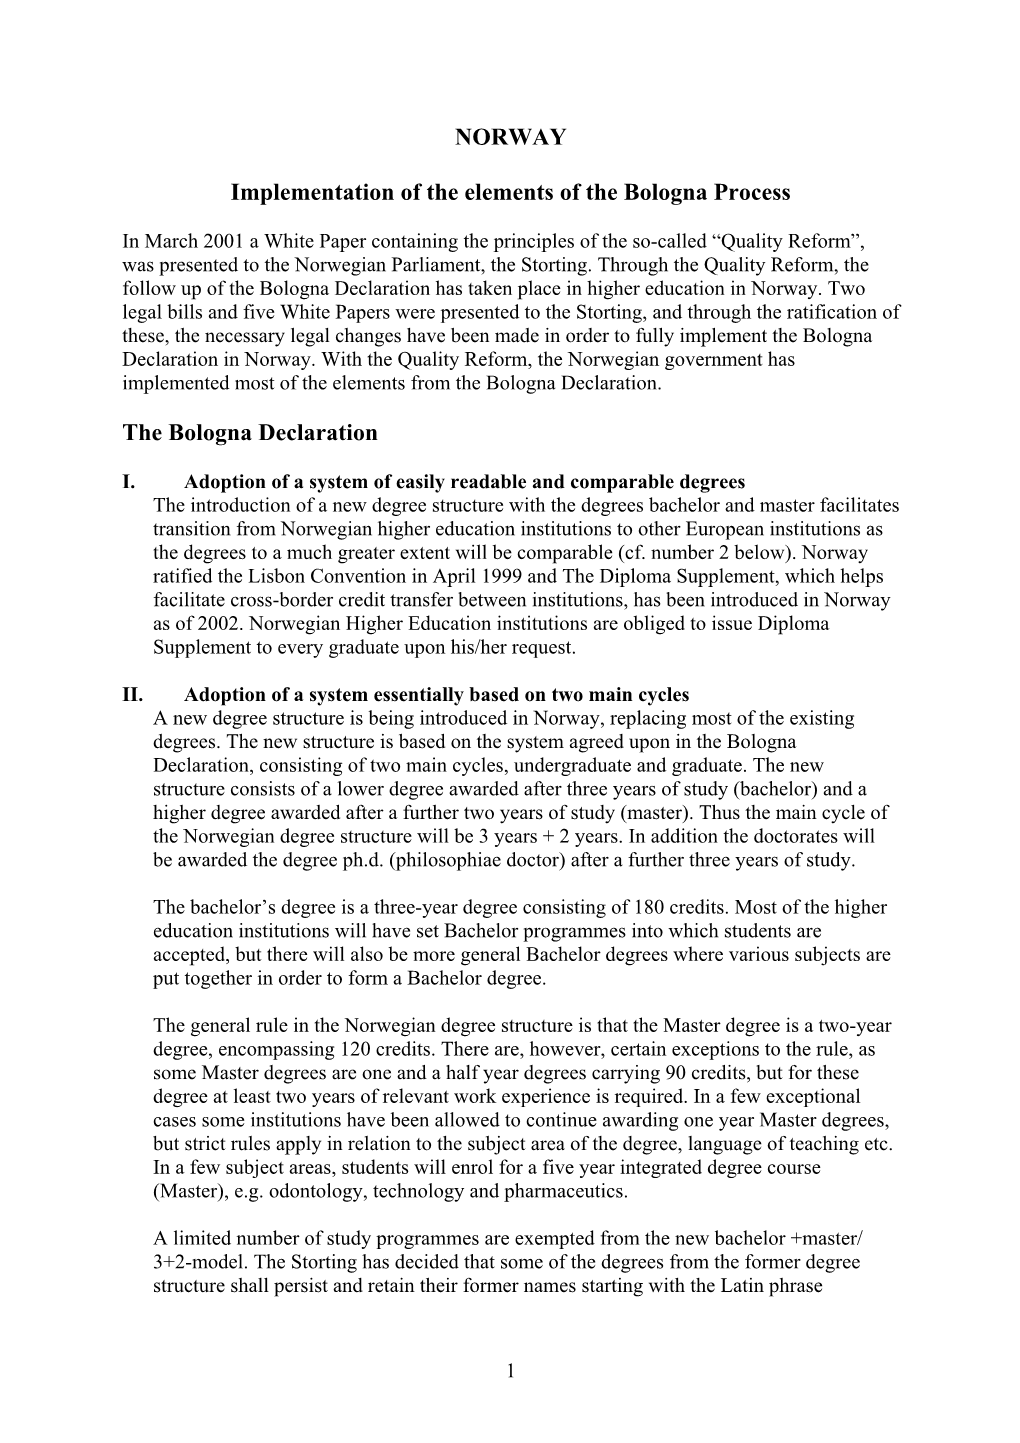 NORWAY Implementation of the Elements of the Bologna Process